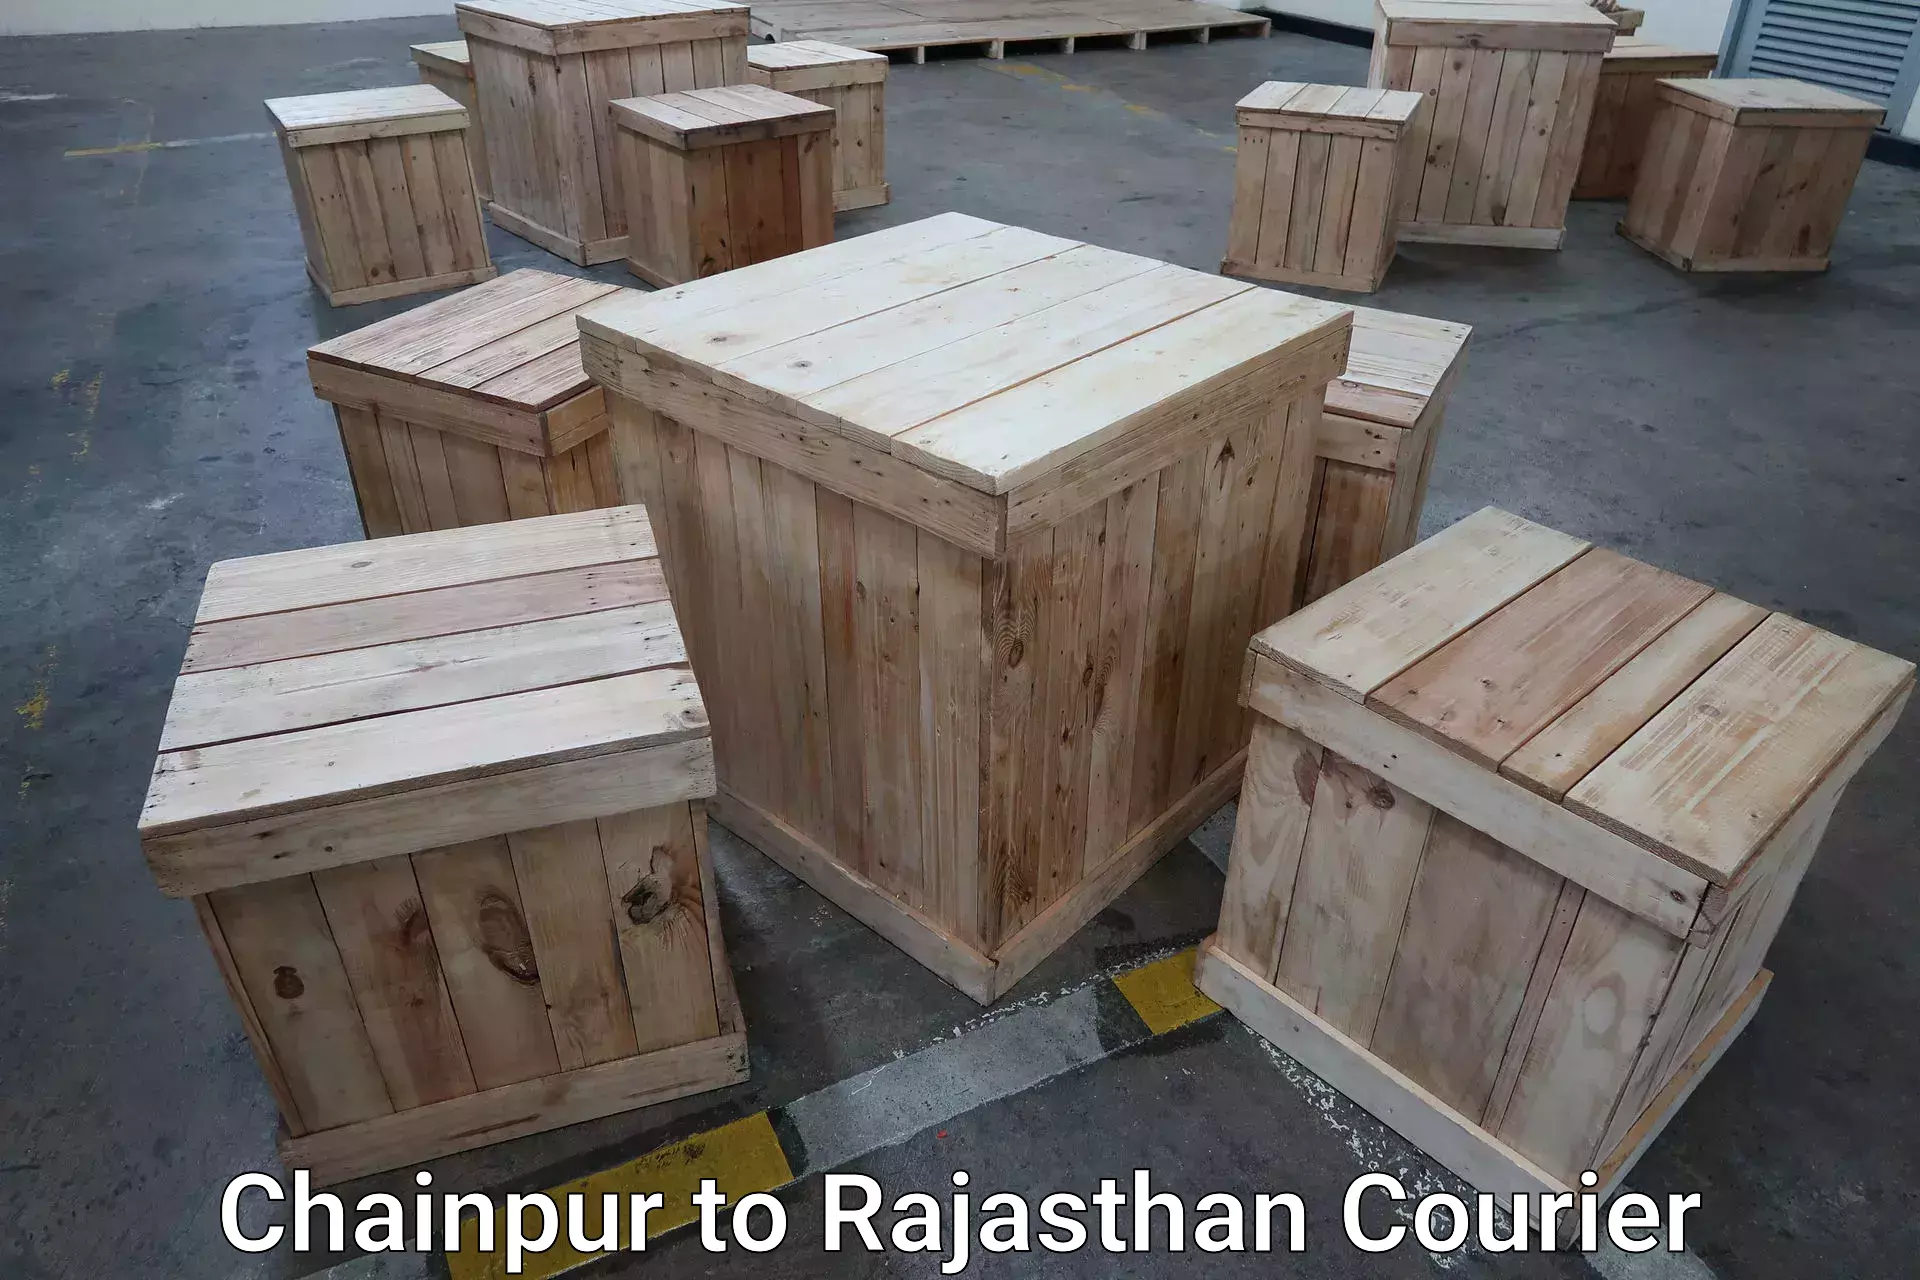 Luggage transport consultancy Chainpur to Rajasthan